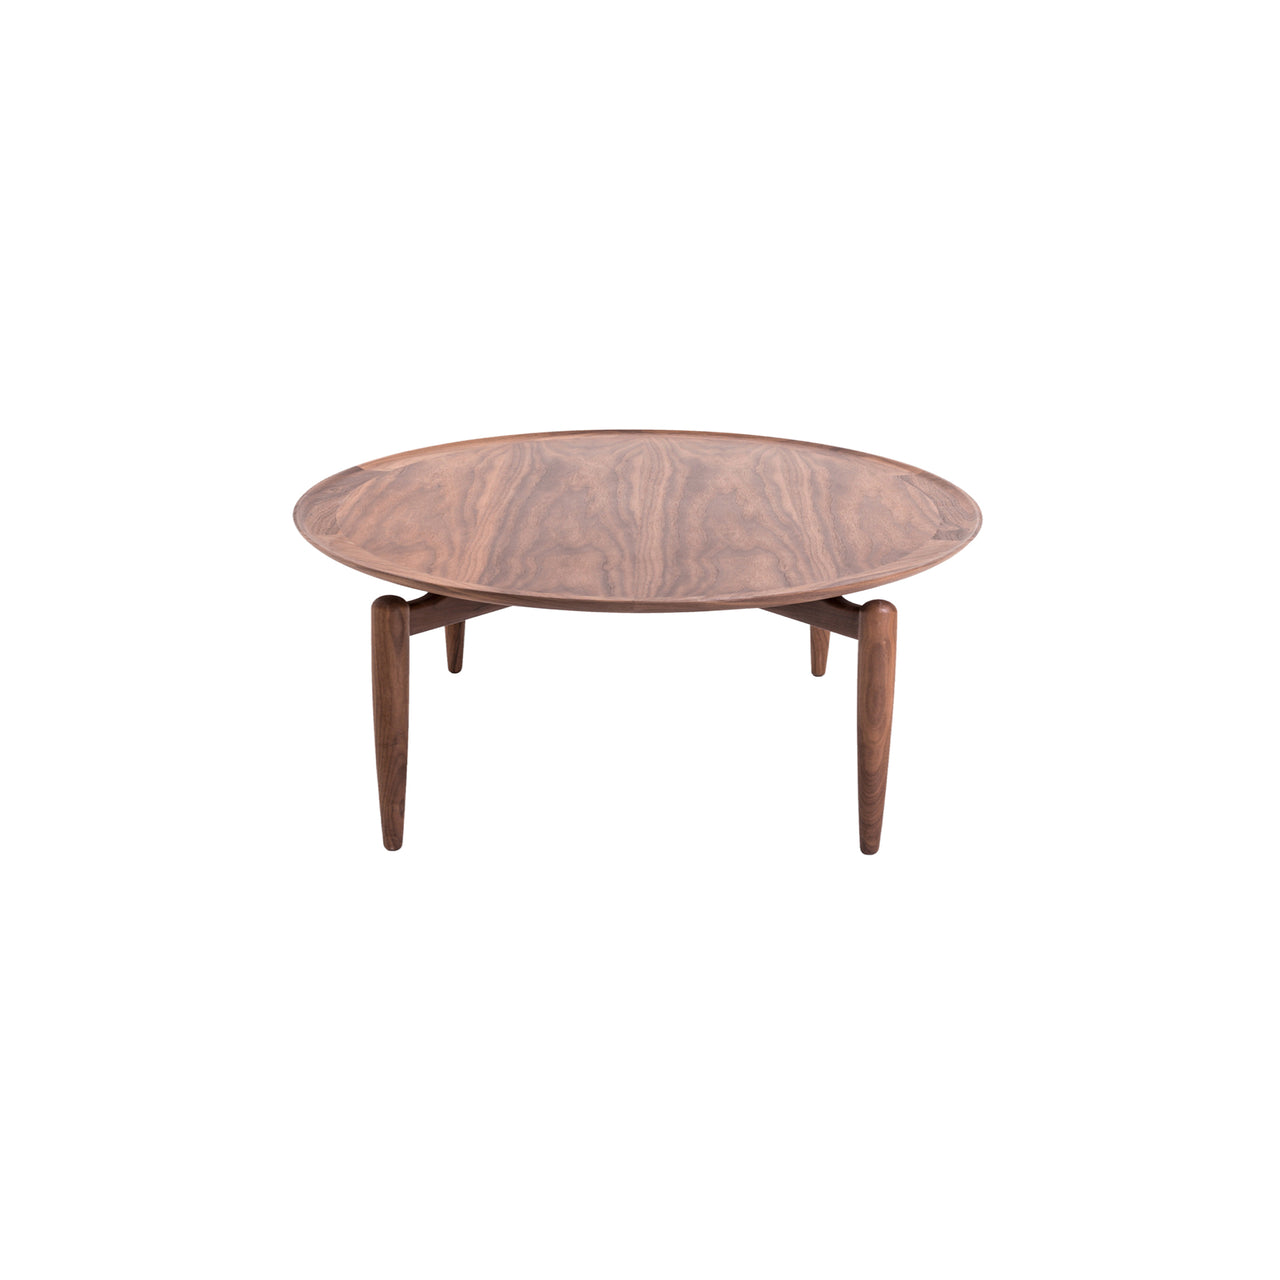 Slow Coffee Table: Natural Walnut + Round